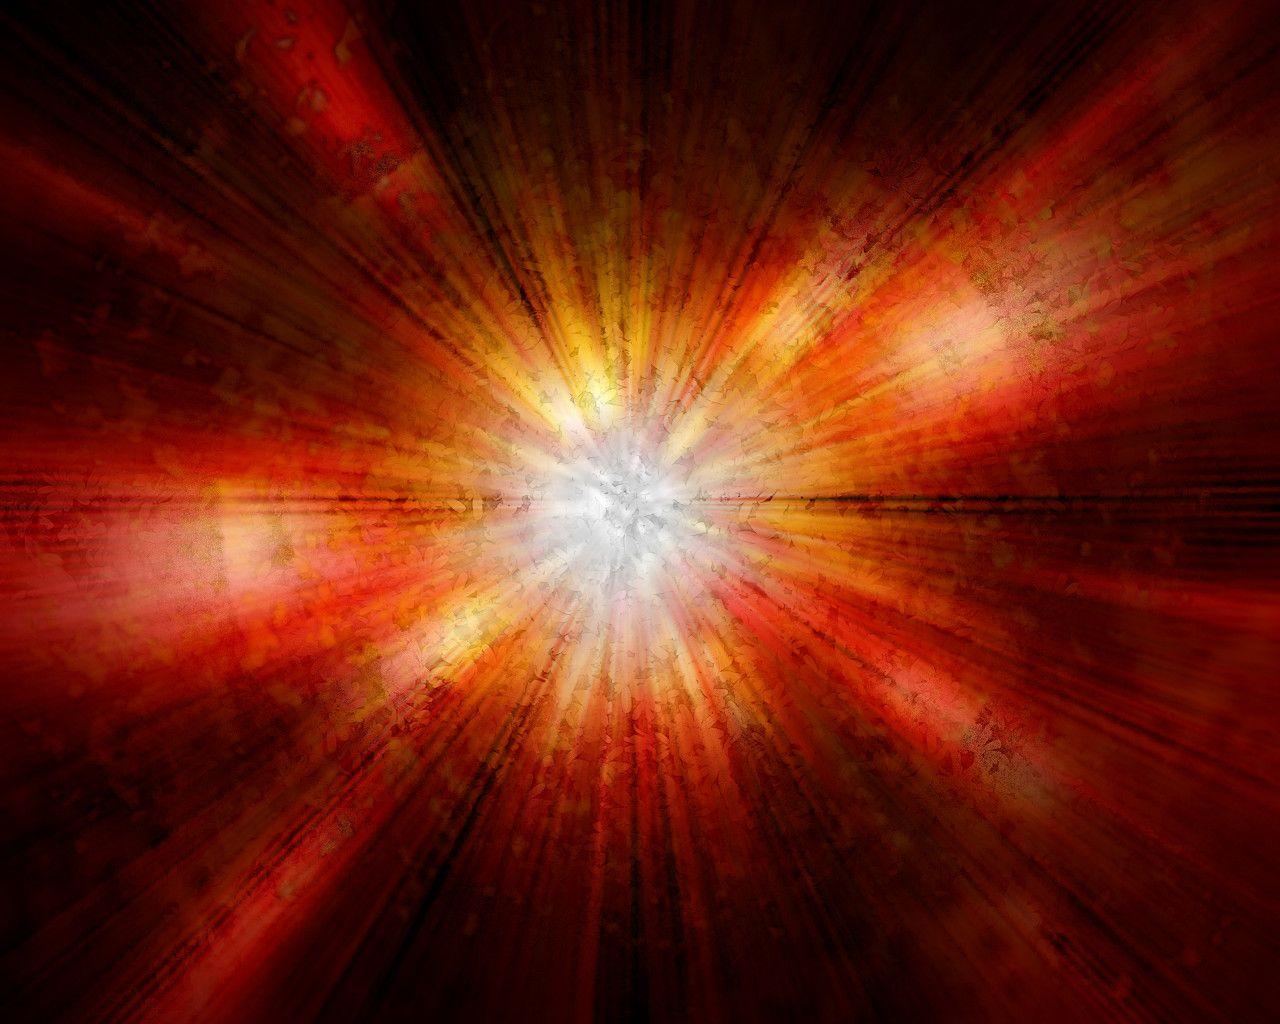 Wide HDQ Explosion Wallpaper, HQ Definition Explosion Pics for Free